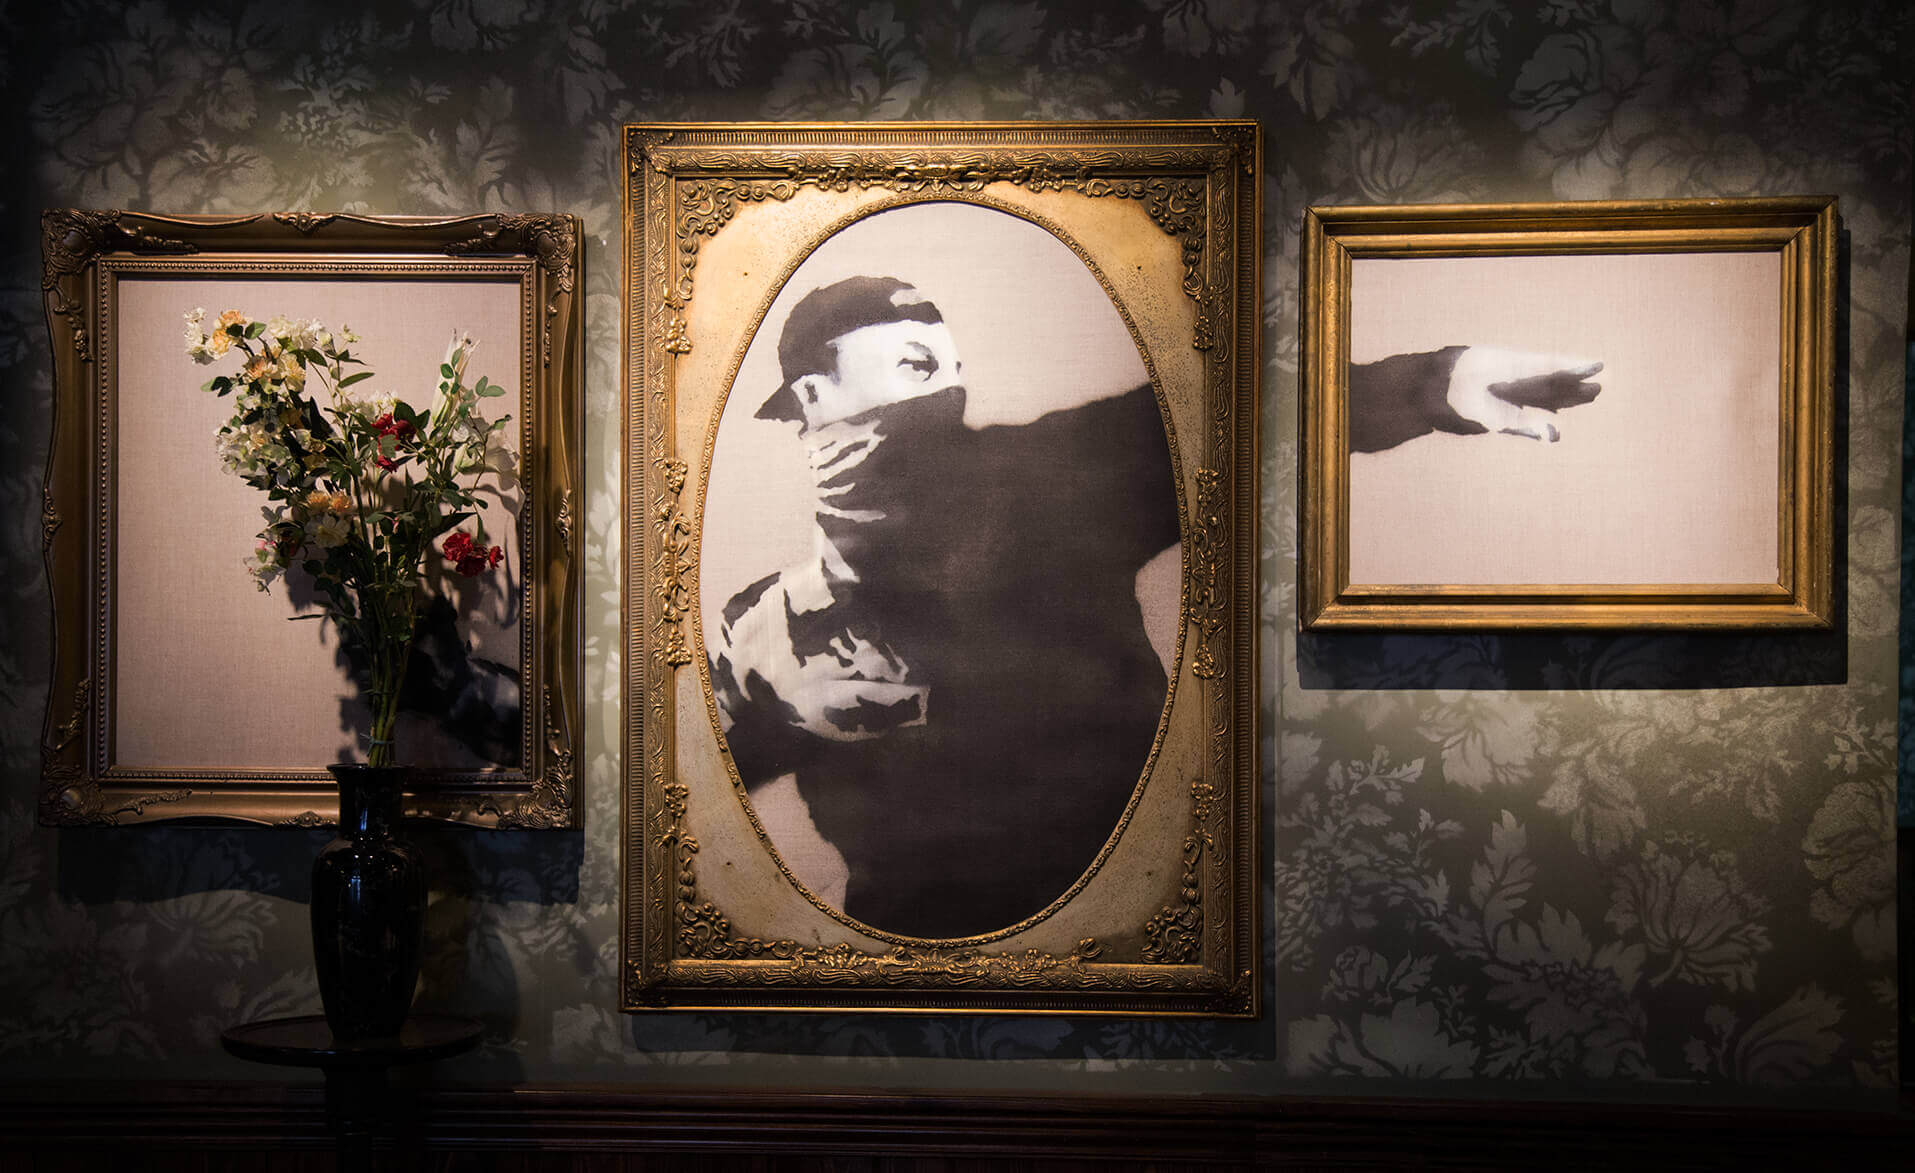 10 Facts about Banksy’s Iconic Flower Thrower / Love is in the Air